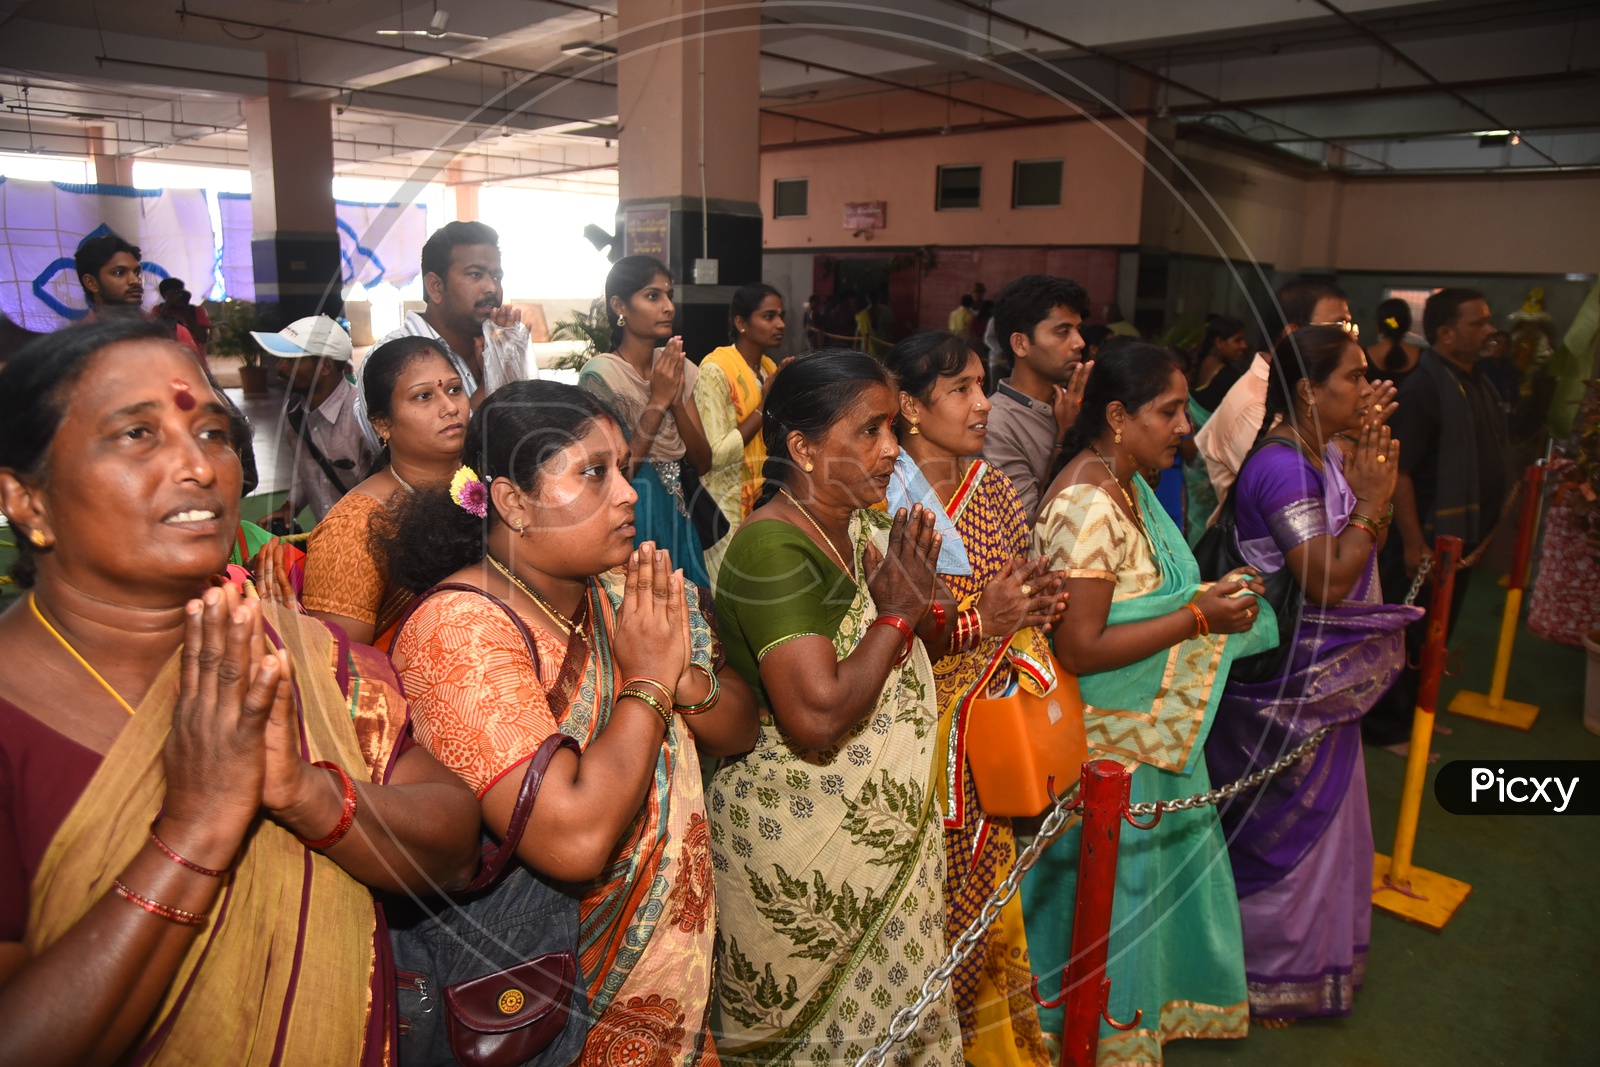 Devotees during worship in a temple